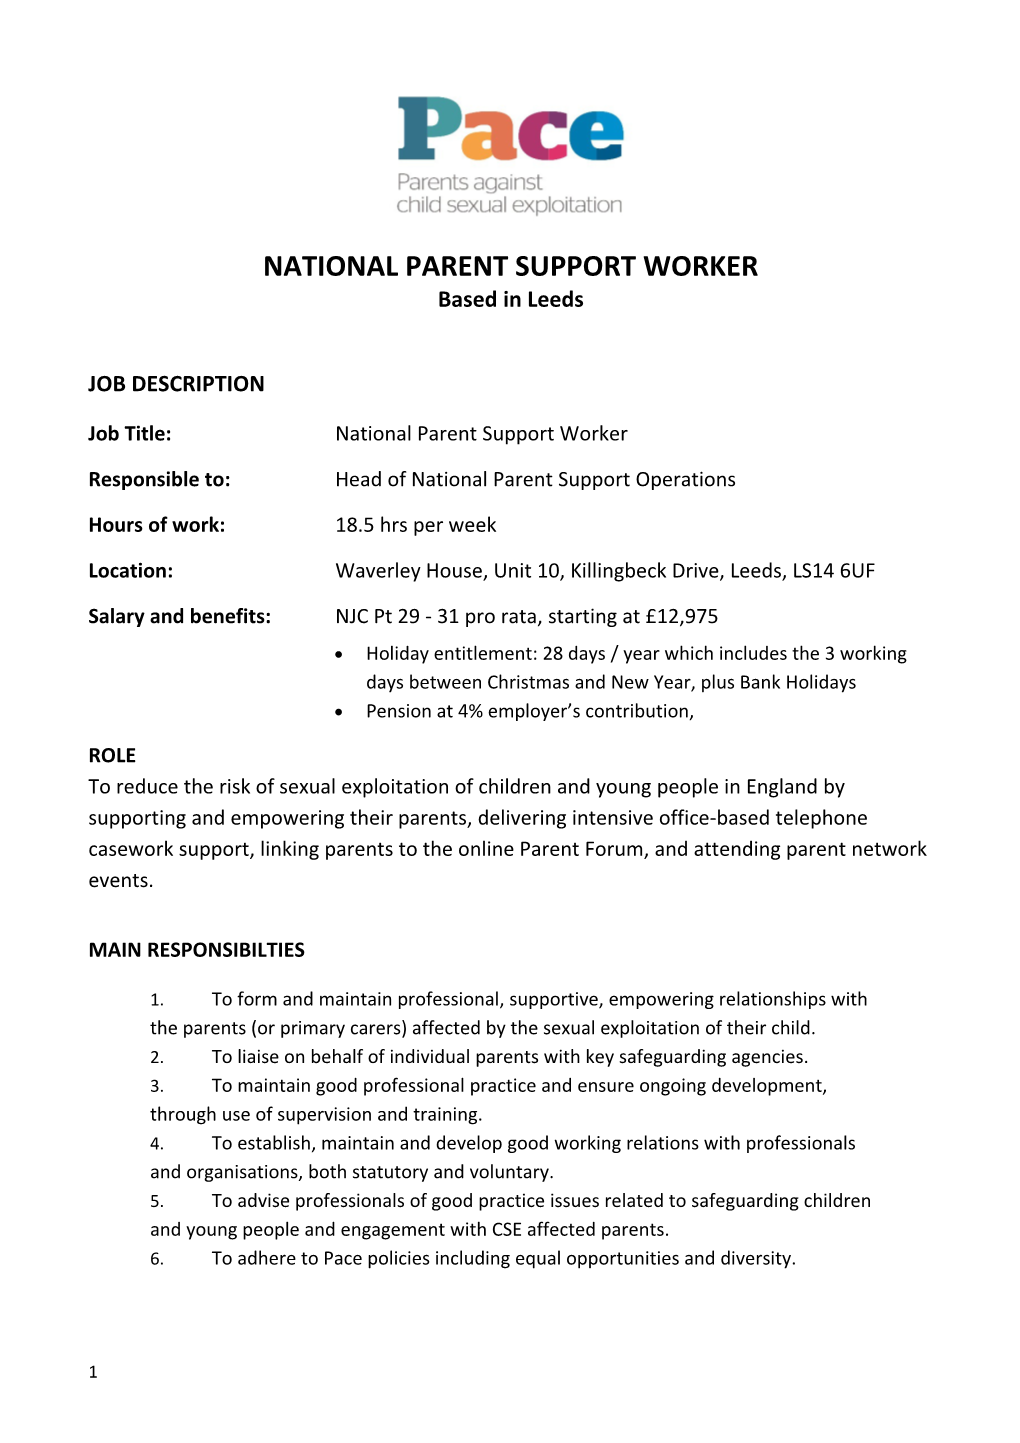 National Parent Support Worker